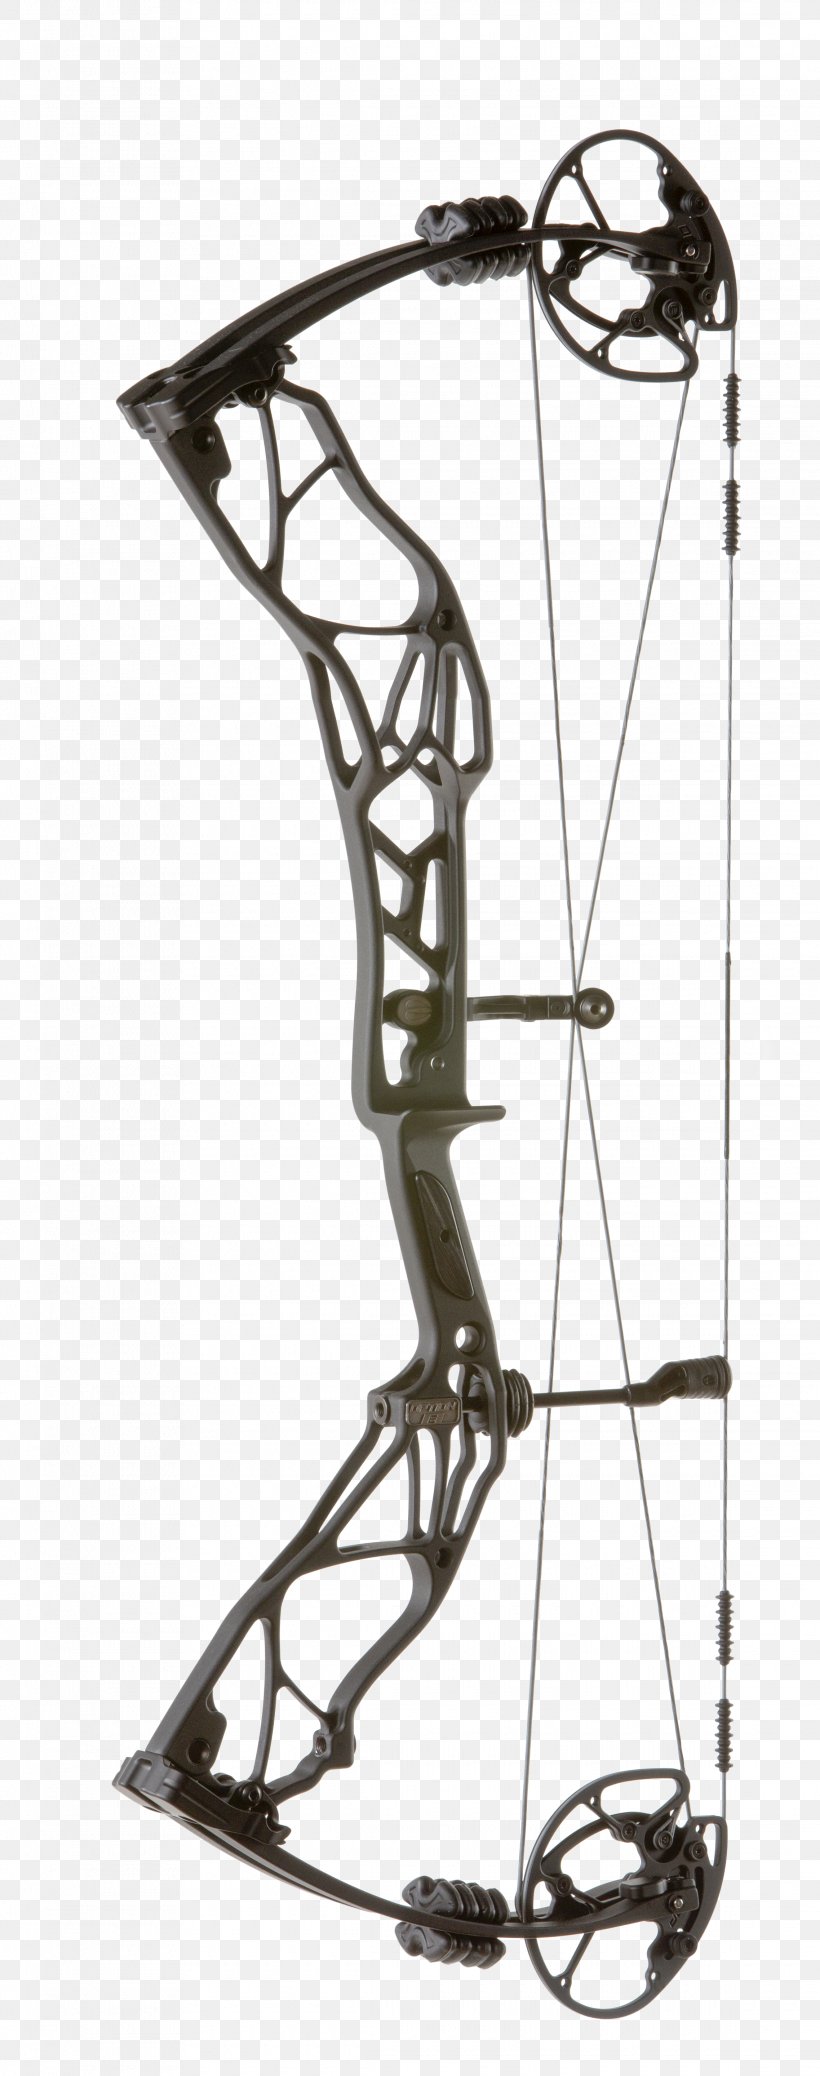 Compound Bows Archery Bowhunting Bow And Arrow, PNG, 2275x5760px, Compound Bows, Archery, Black And White, Bow And Arrow, Bowhunting Download Free